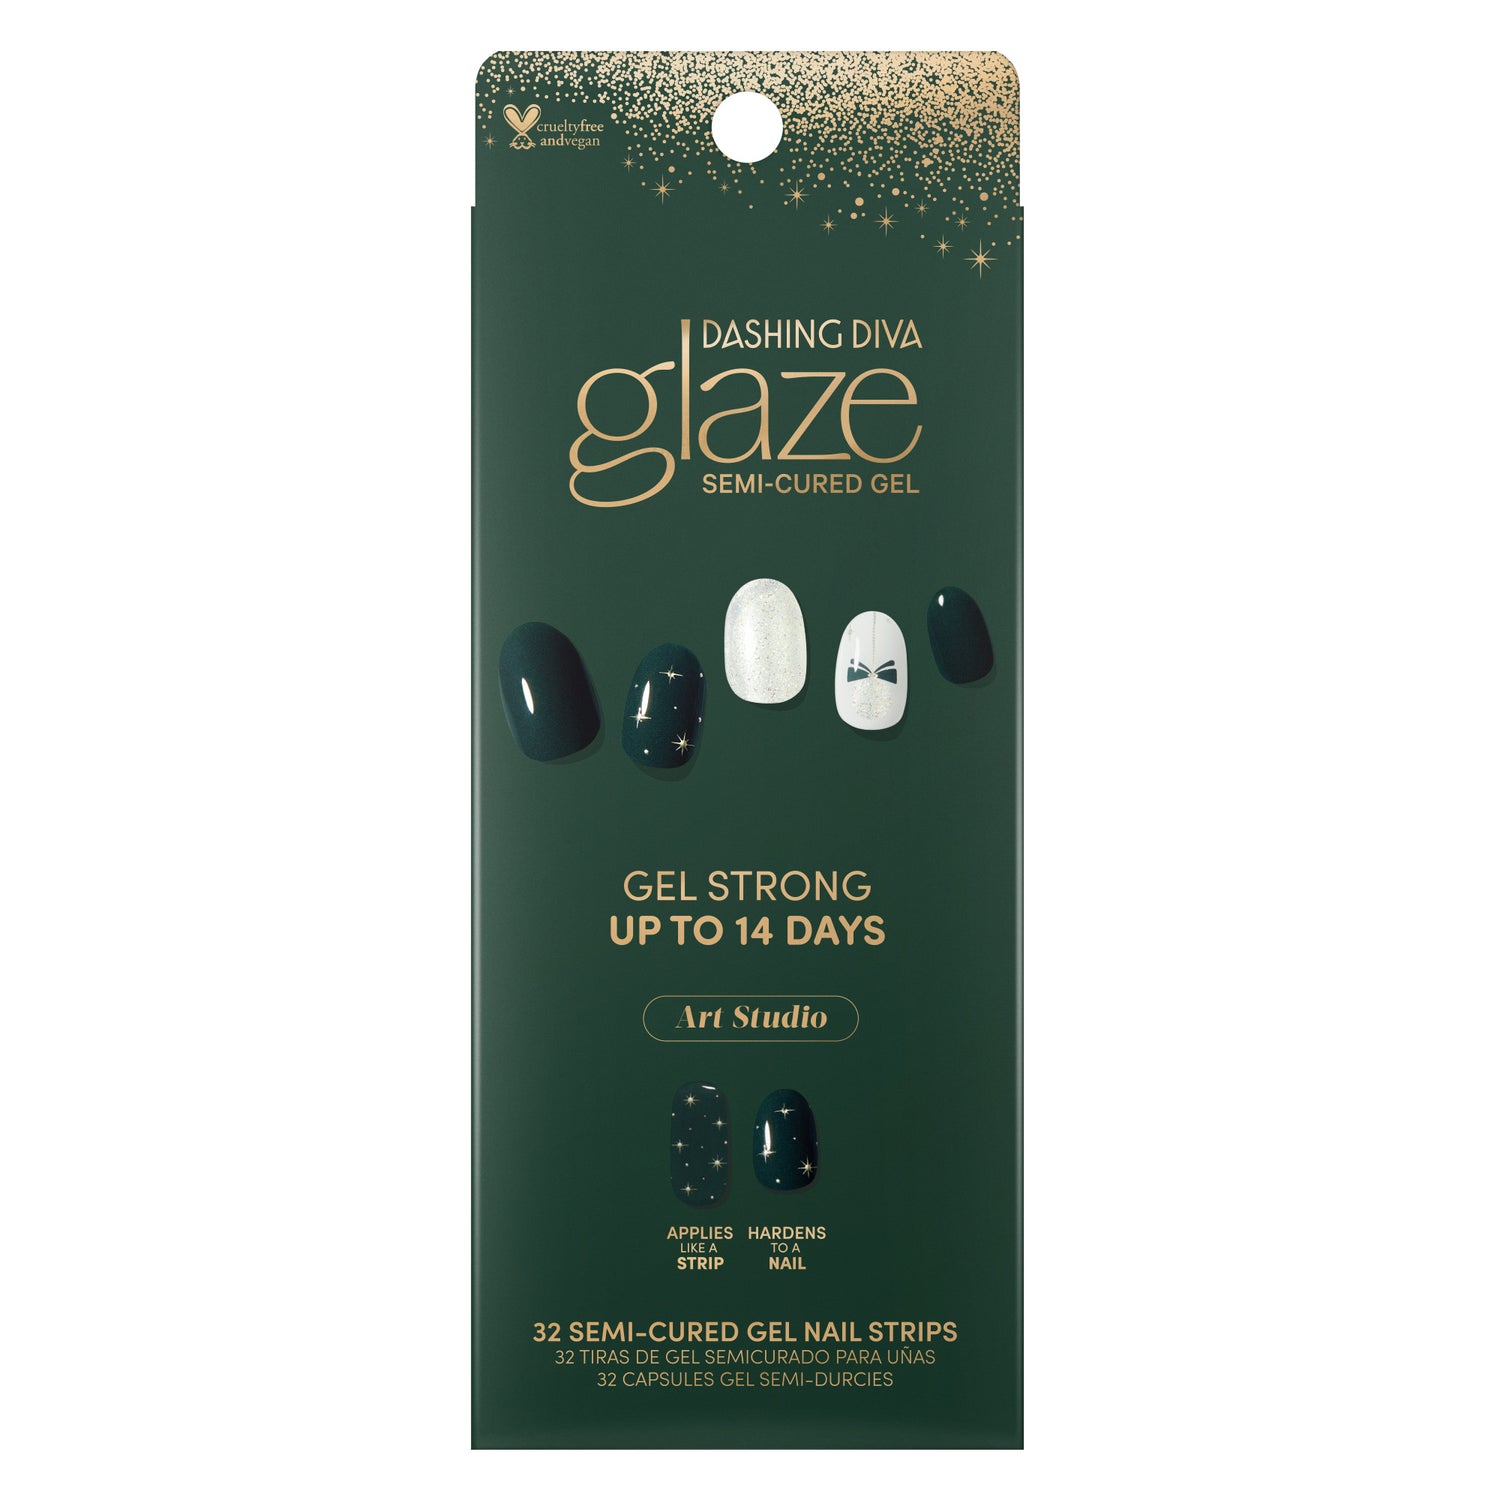 Semi-cured deep green and cream gel nail strips featuring champagne glitter, gold foil stars, and ornament accents with mega volume & maximum shine.